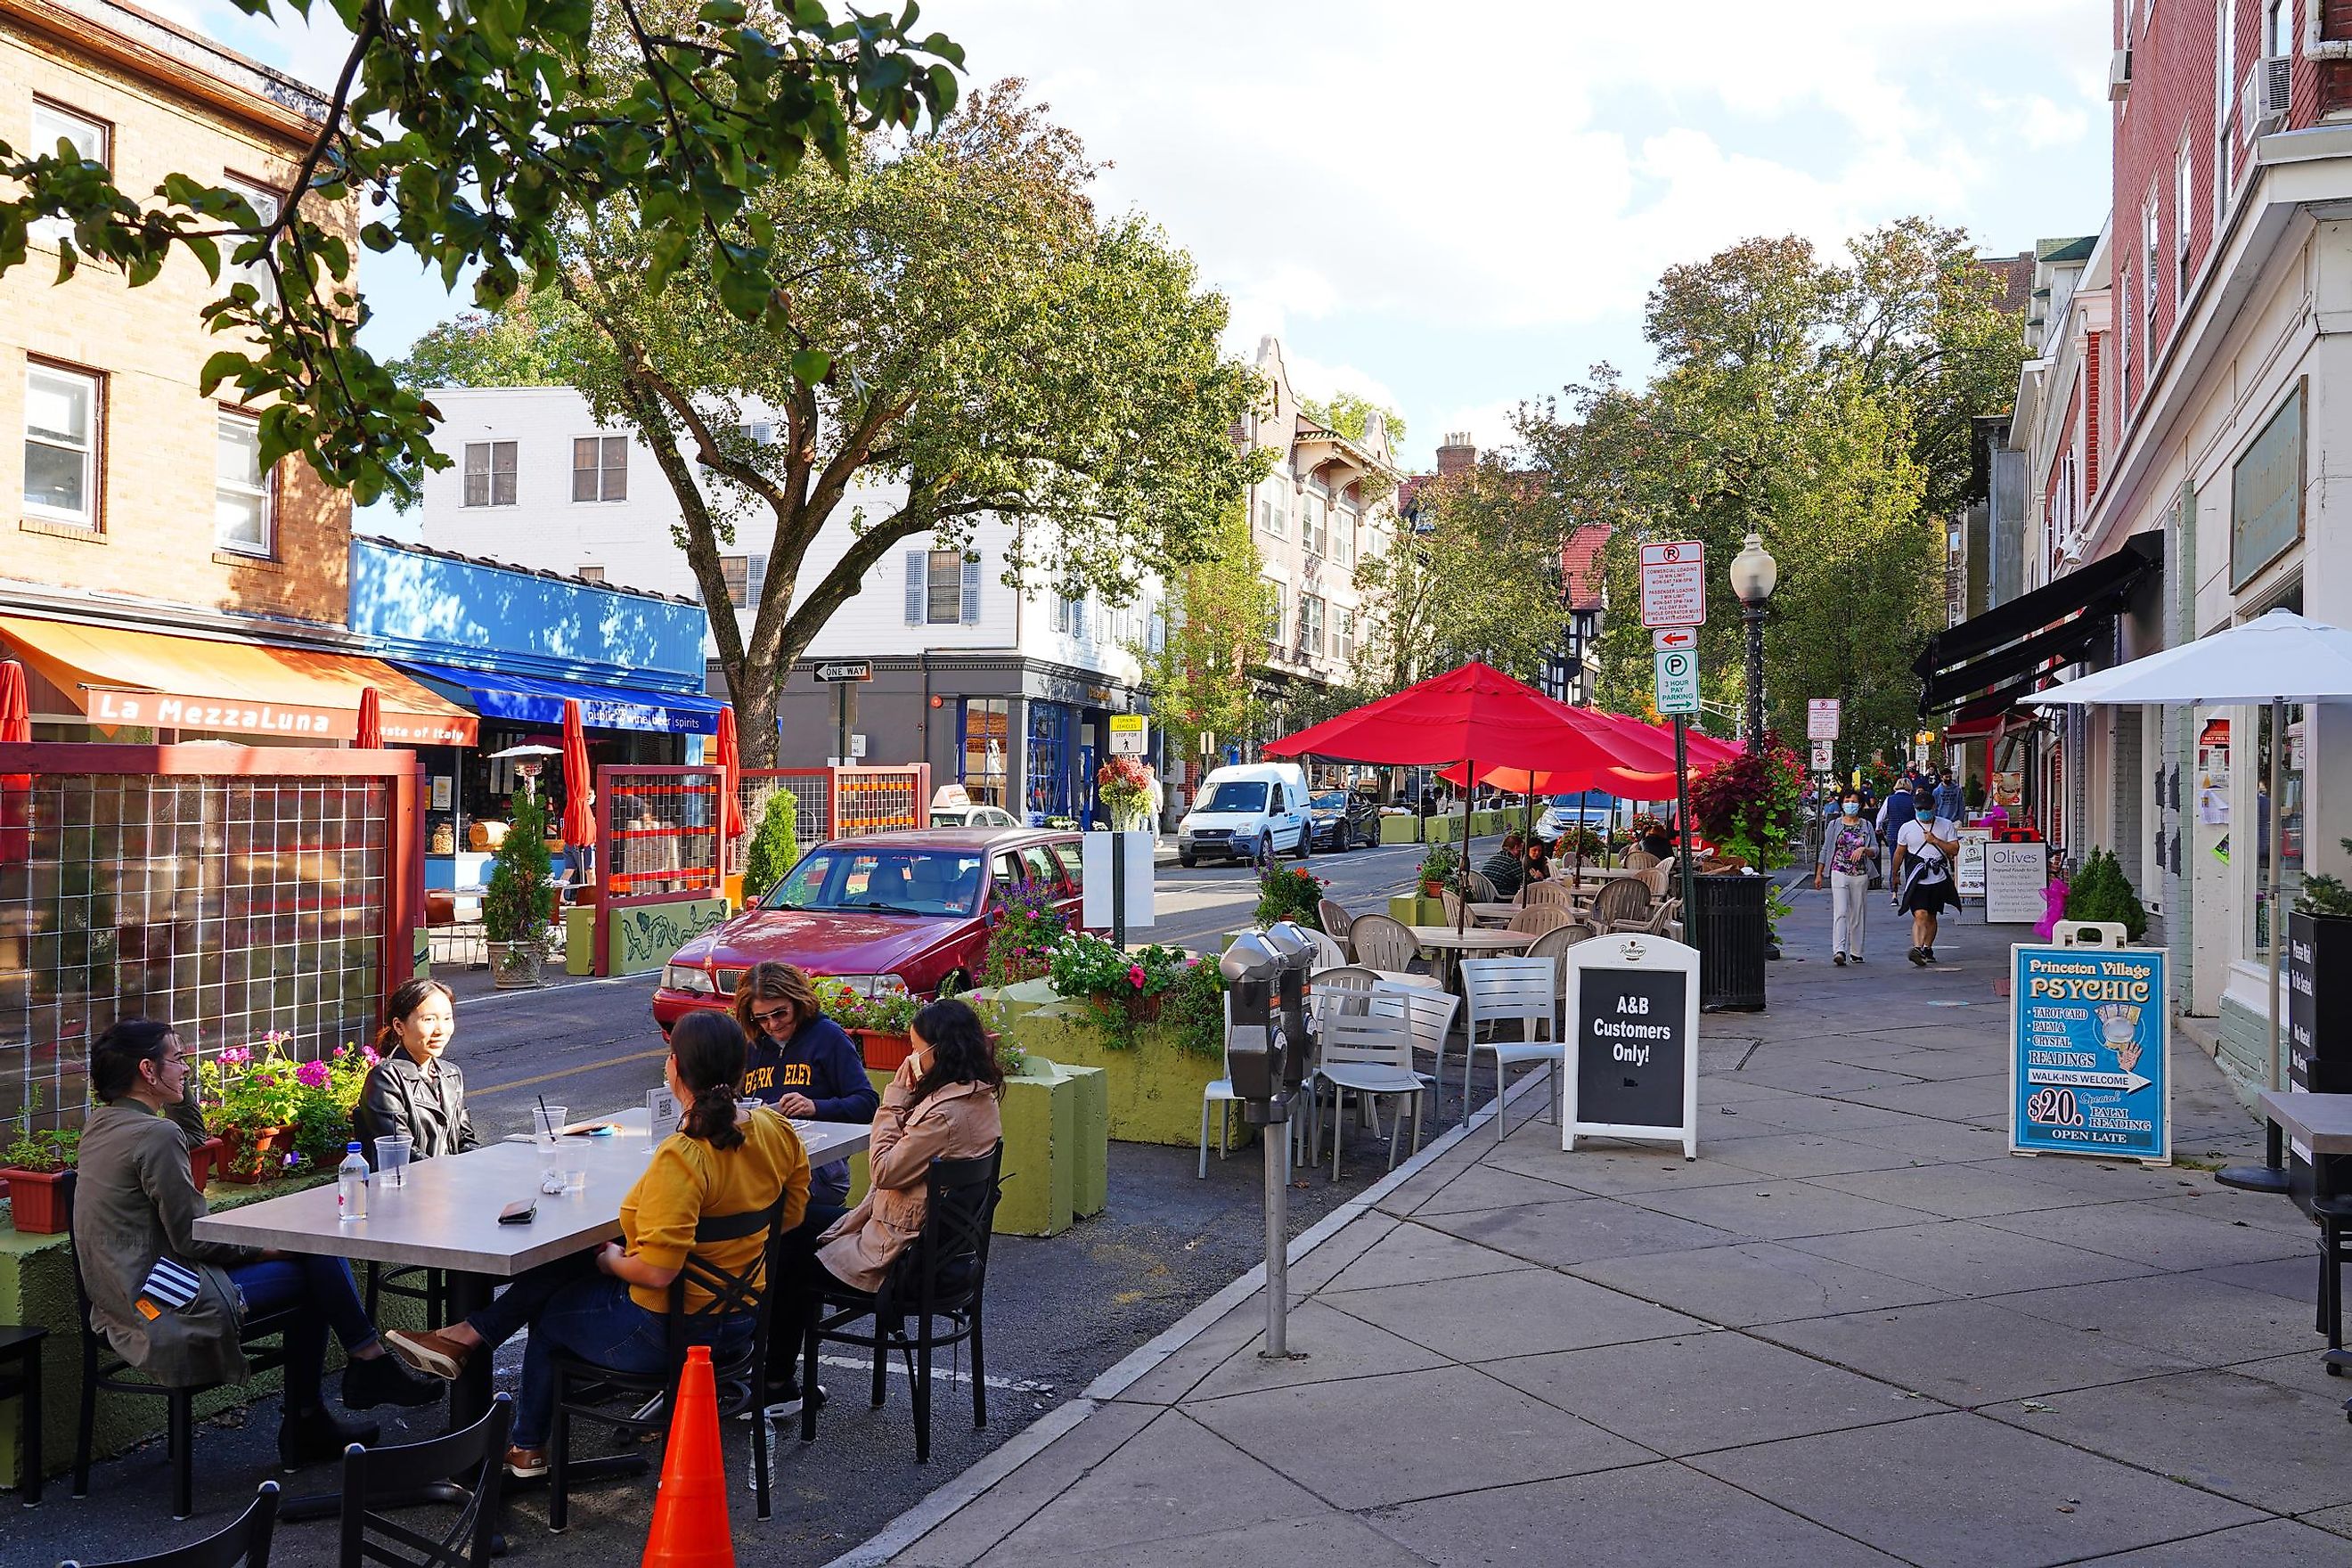 View of people eating on outdoor patios on Witherspoon Street in downtown Princeton, New Jersey, United States.